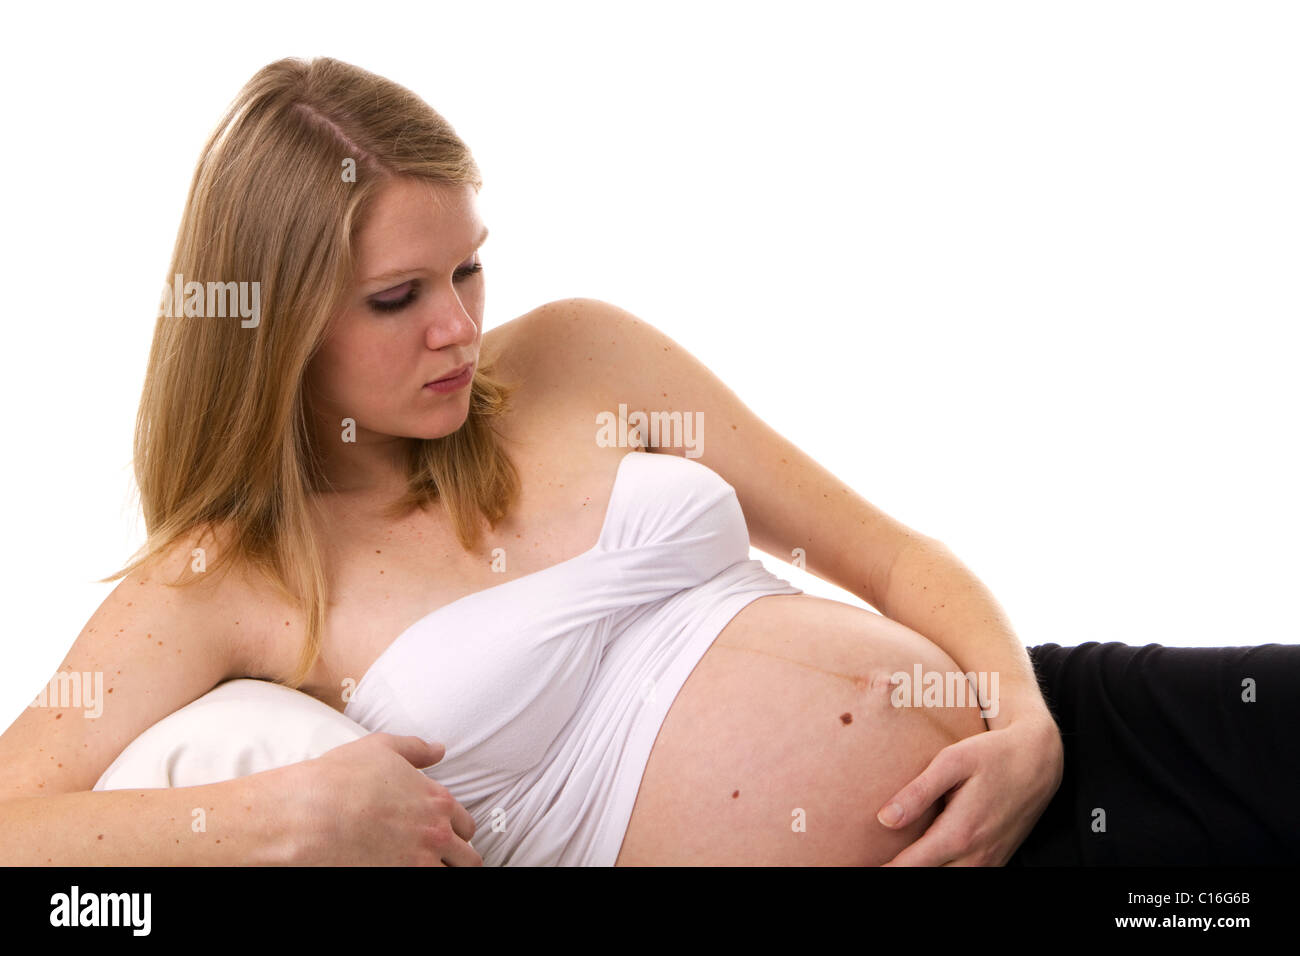 Pregnant woman in a reclining position thinking about her unborn child as she holds her abdomen. Stock Photo